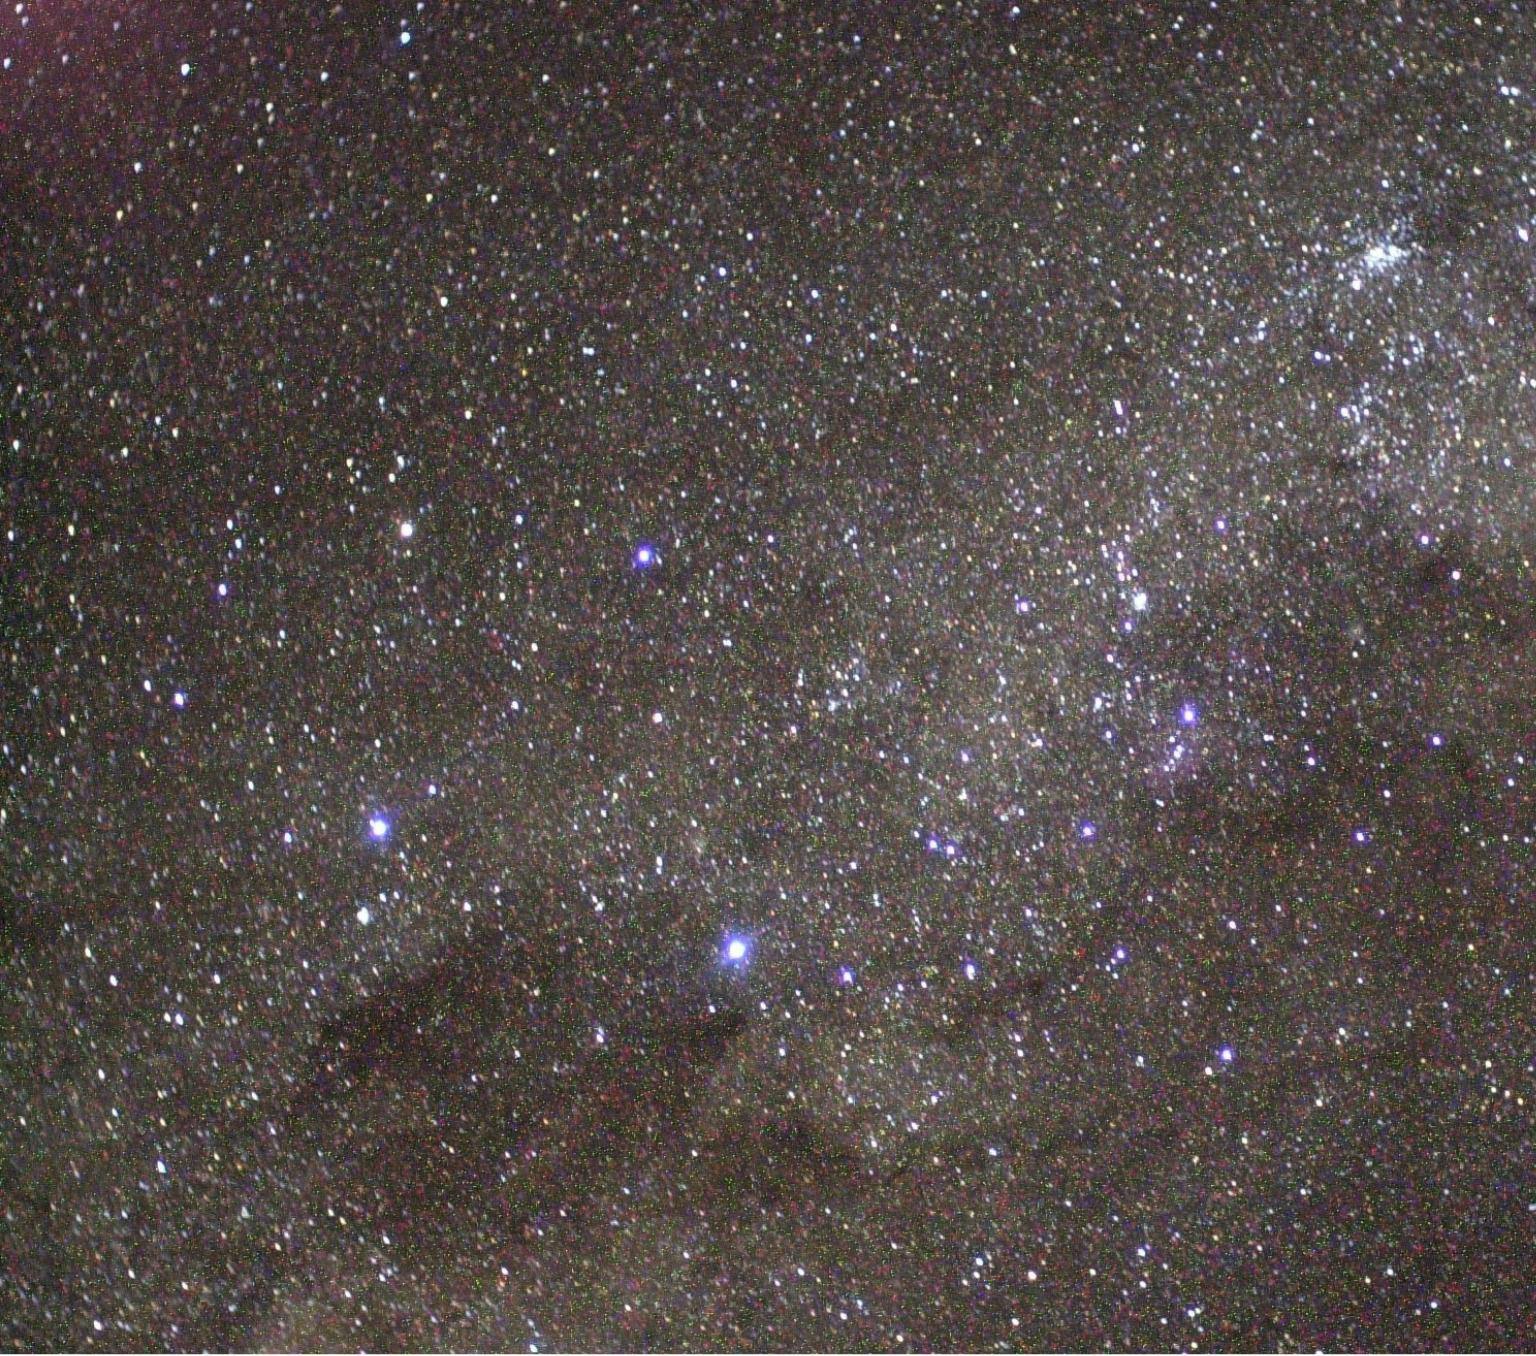 The Southern Cross (left center), the Coal Sack Nebula (bottom left), and the Carina Nebula (upper right) are visible in this view